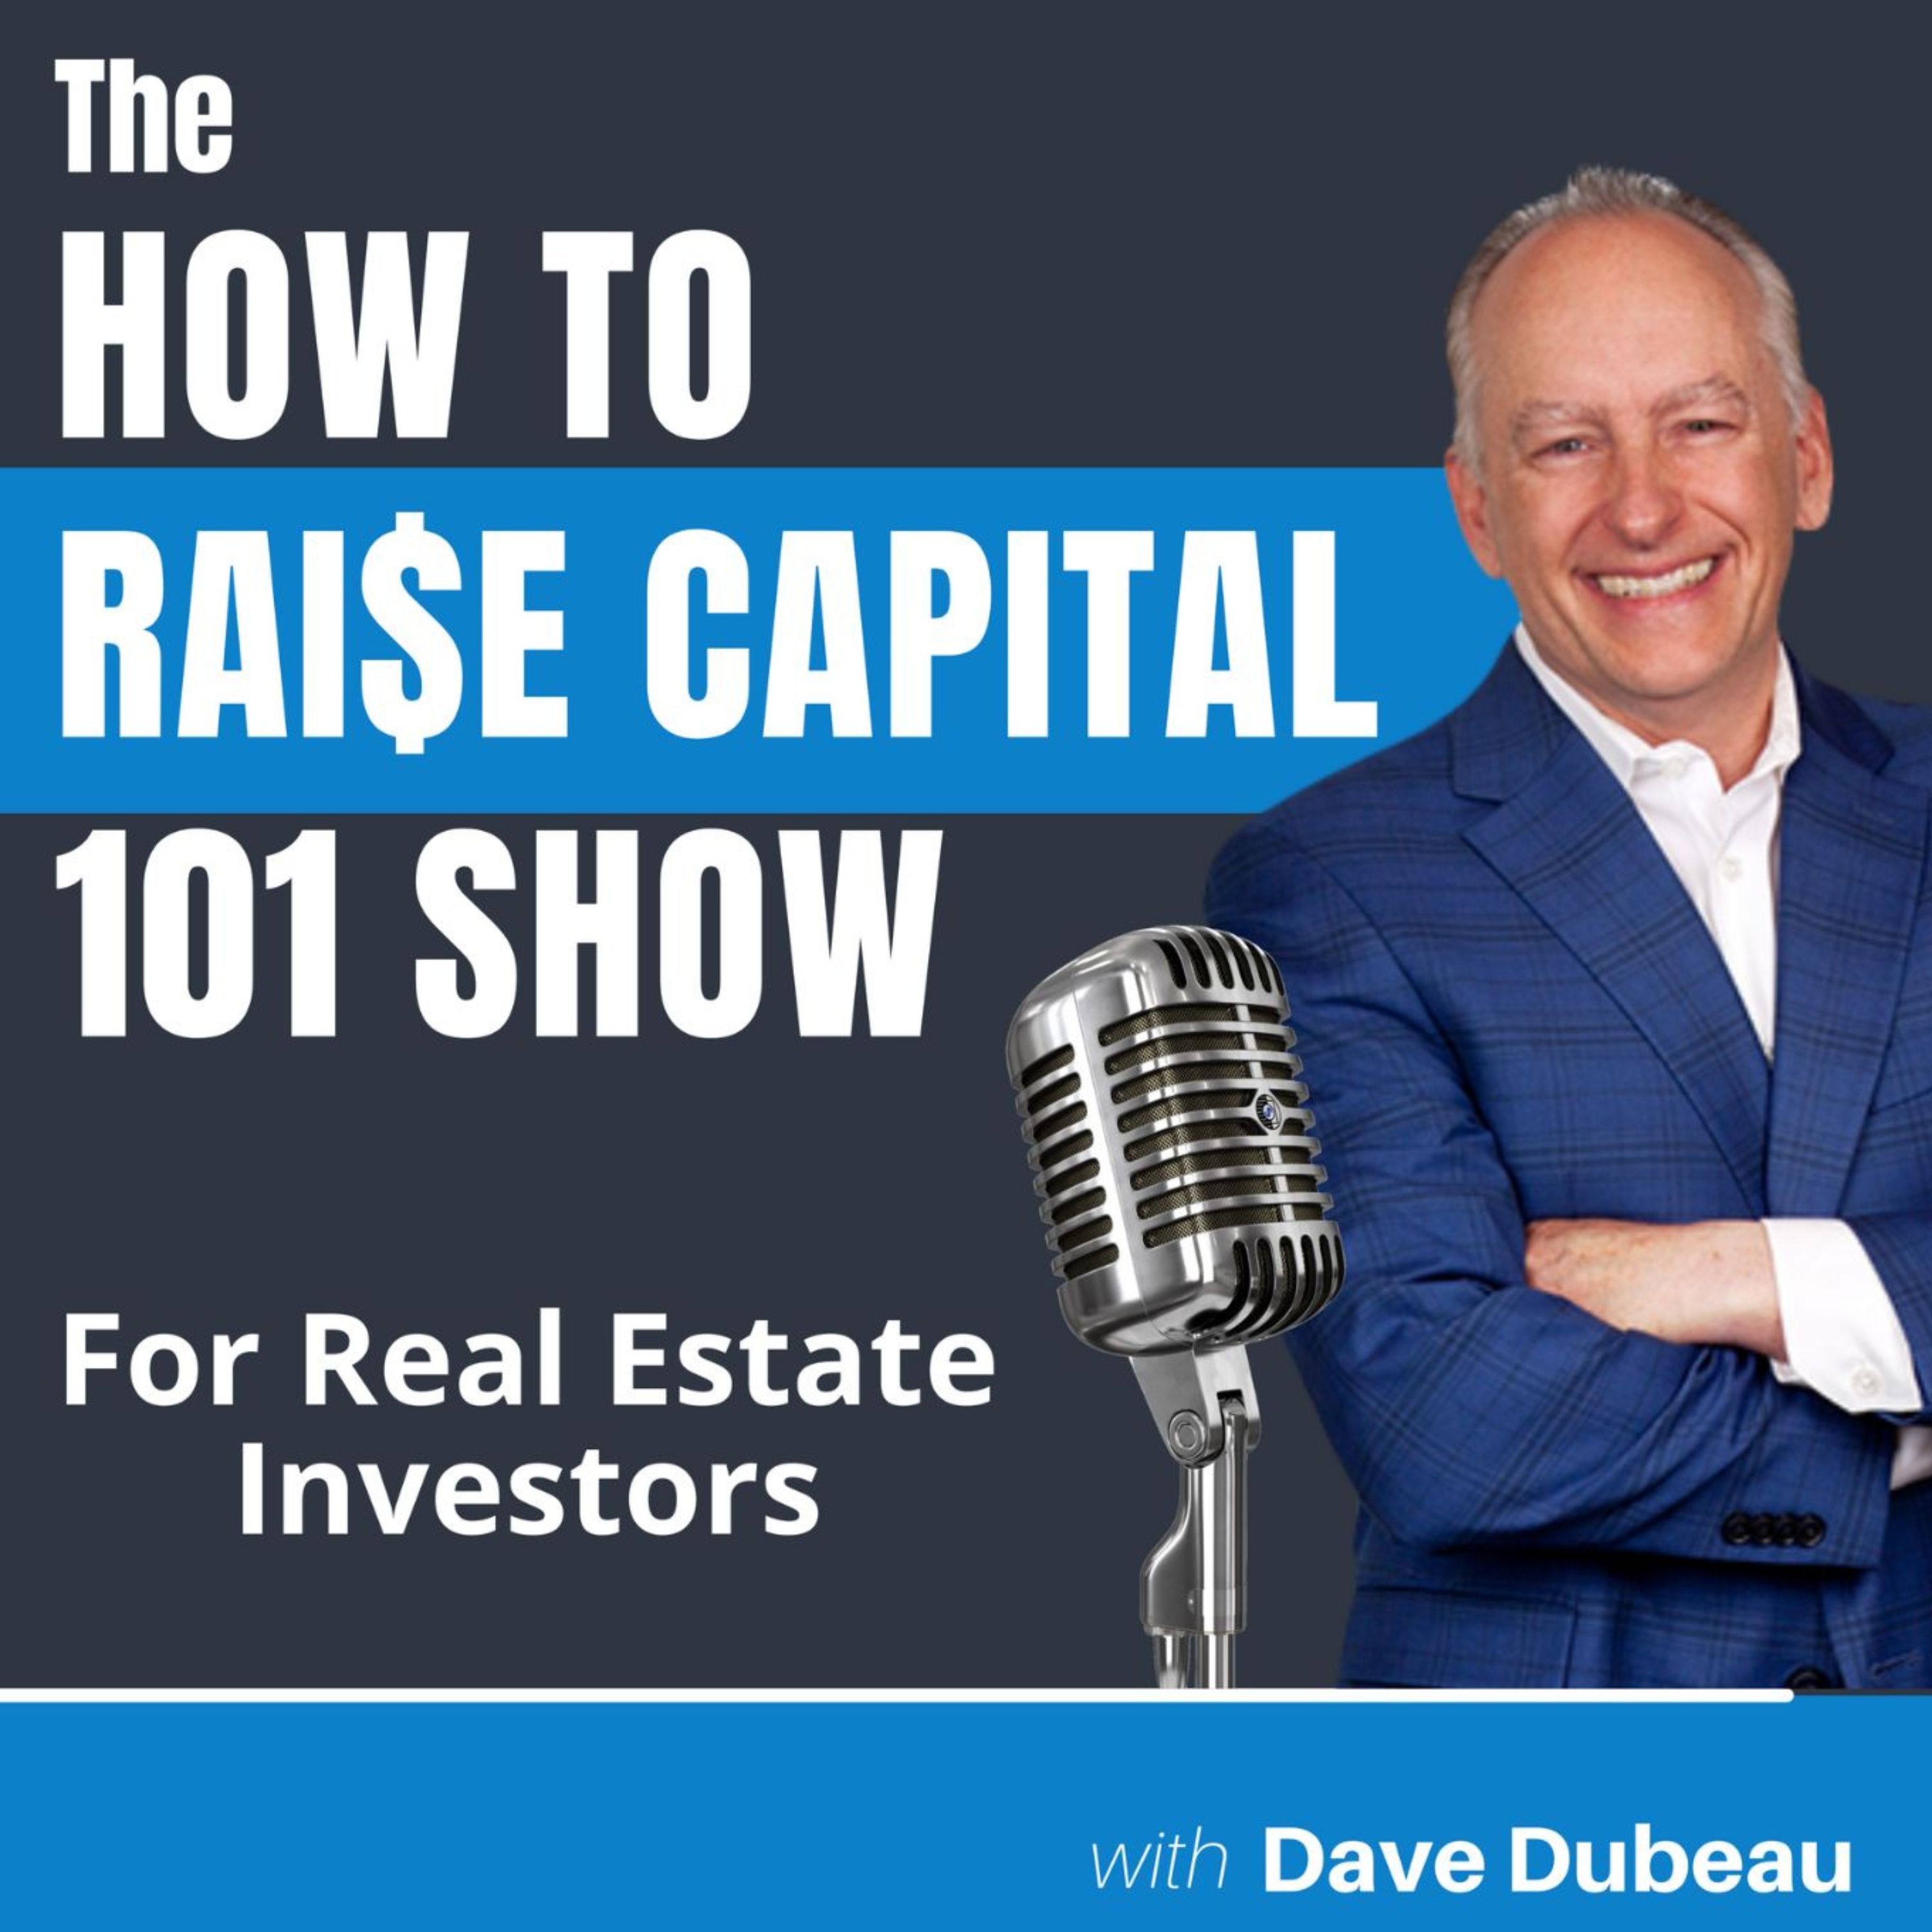 How to Raise Capital 101 Show for Real Estate Investors